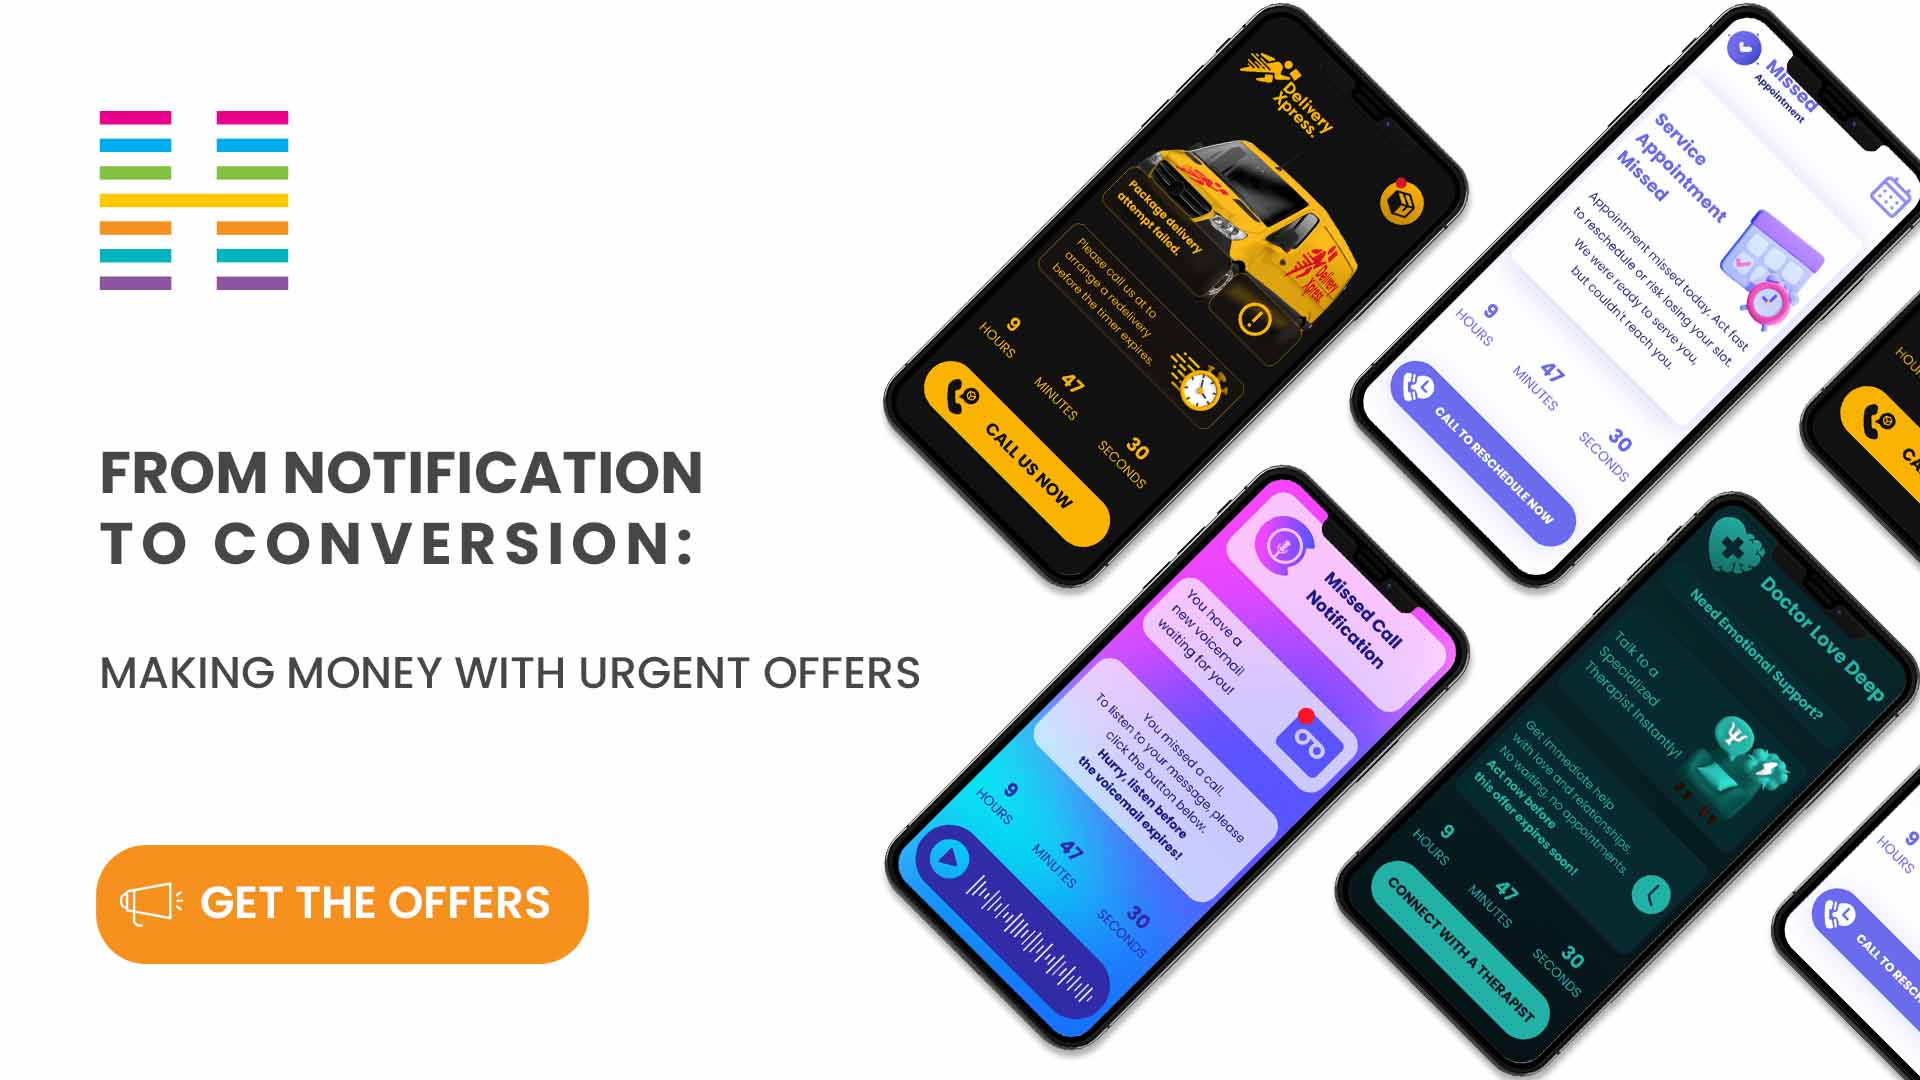 From Notification to Conversion: Making Money with Urgent Offers